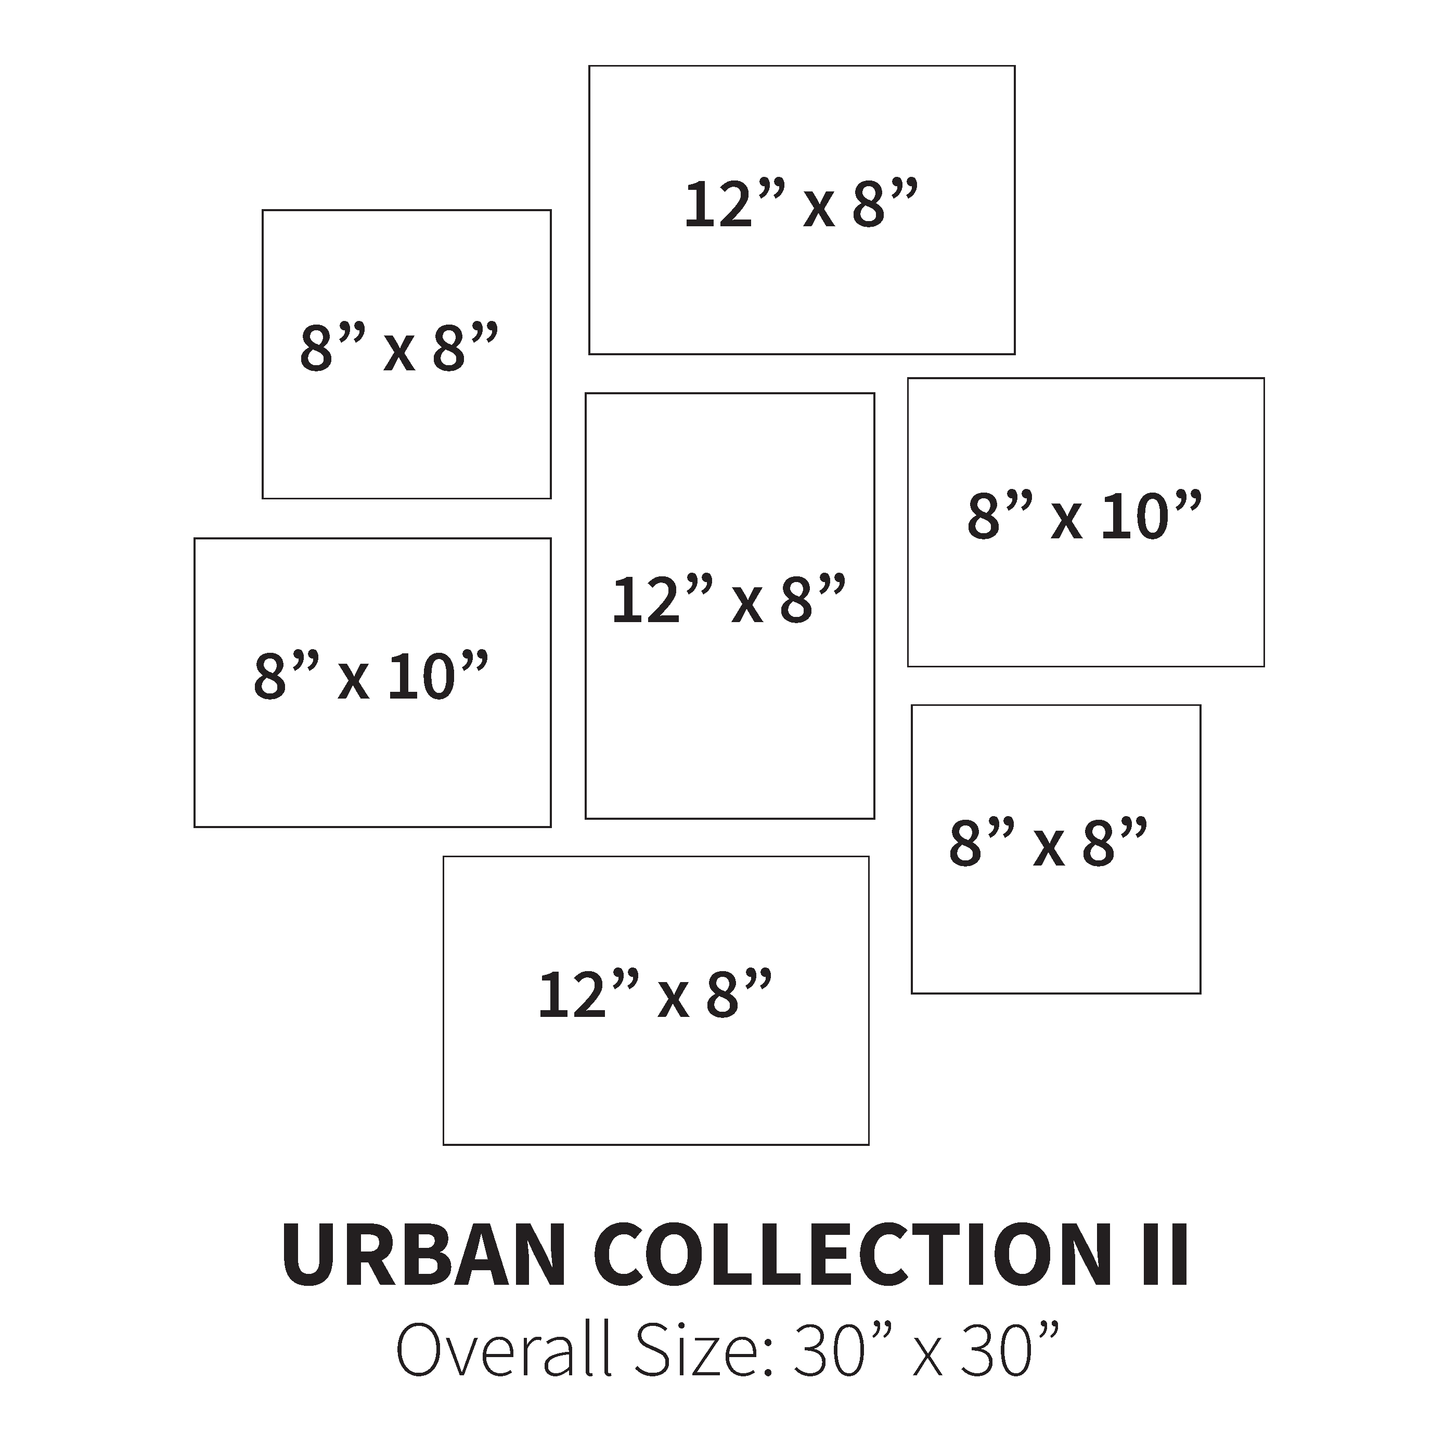 Urban Collection II (Overall Size: 30" x 30")